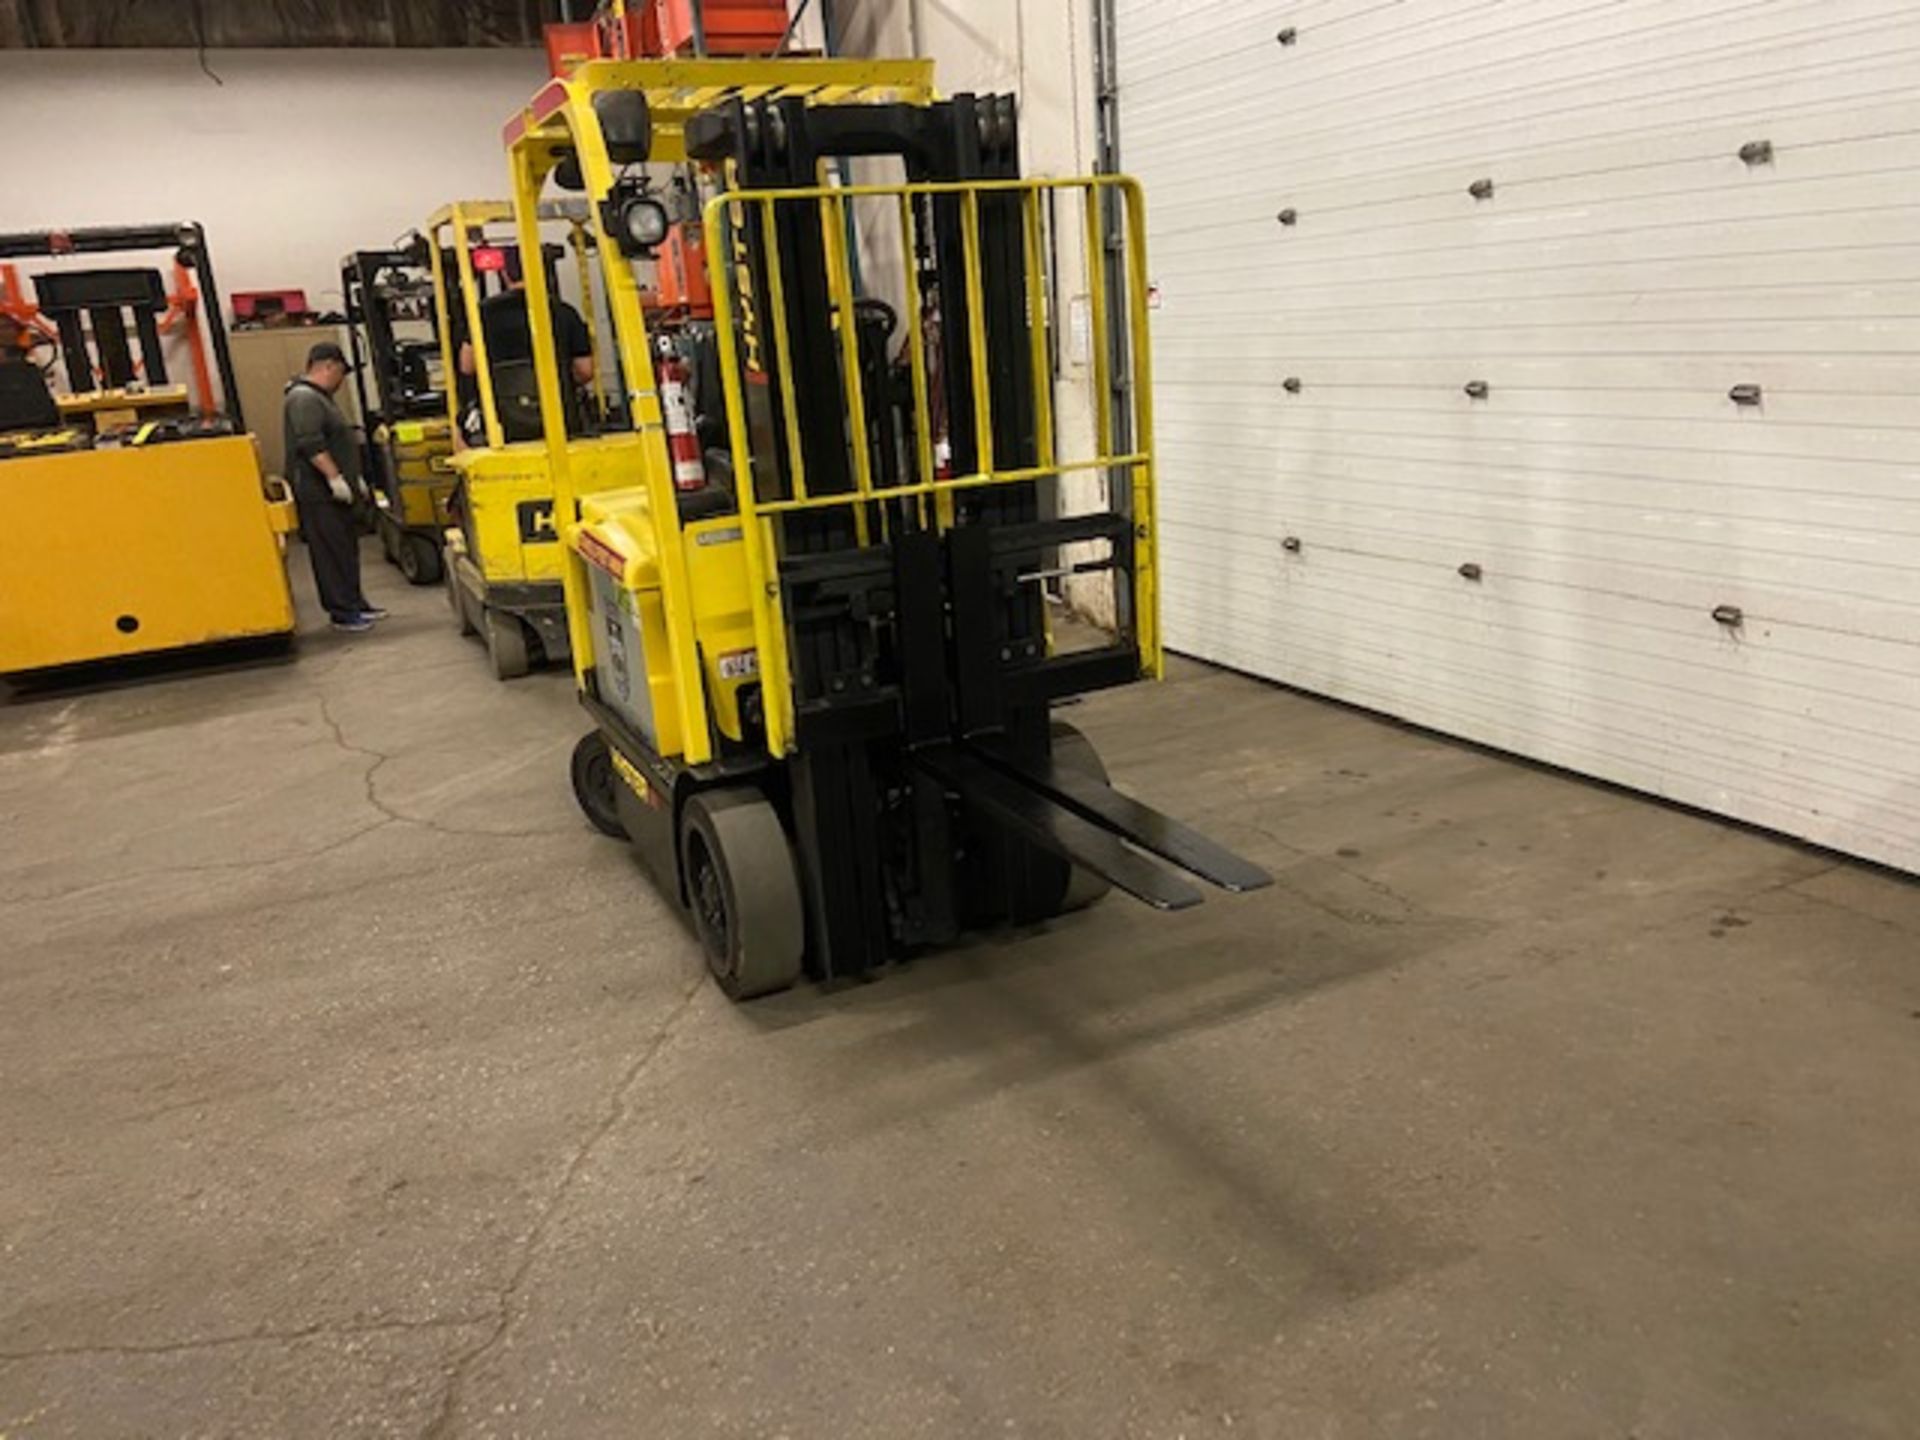 FREE CUSTOMS - 2012 Hyster 5000lbs Capacity Forklift with 3-stage mast - electric with sideshift - Image 2 of 2